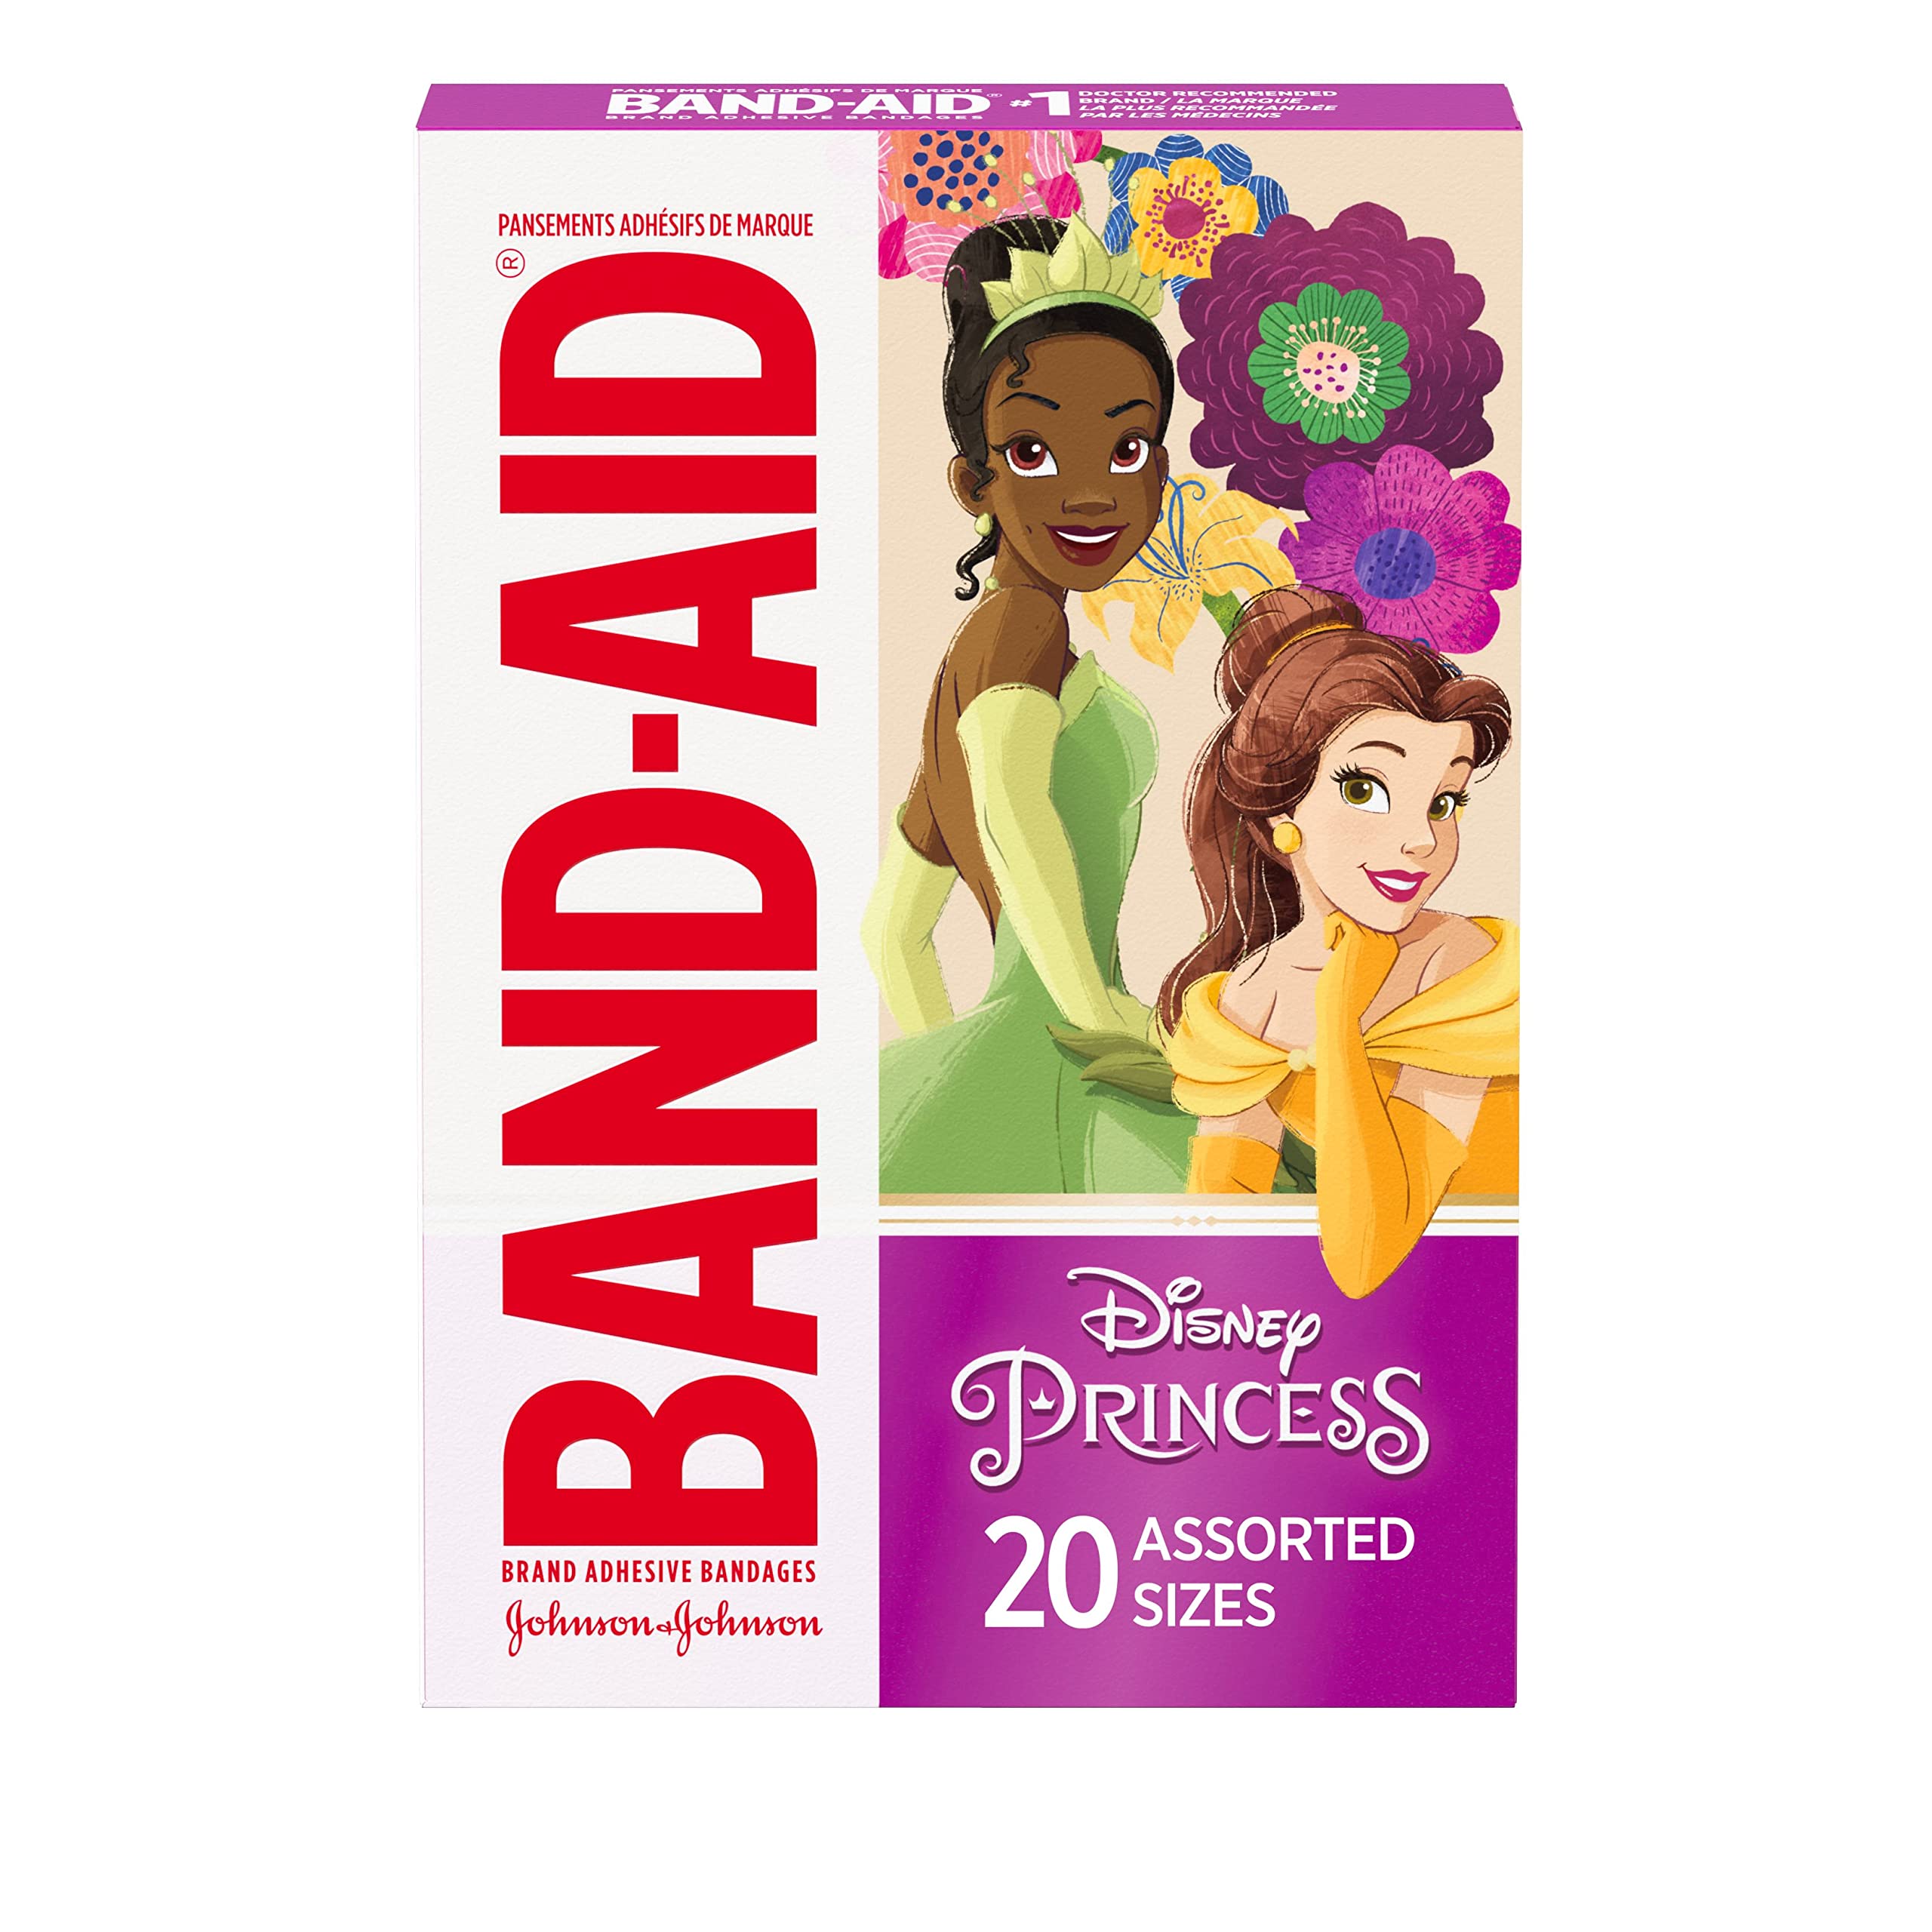 Band-Aid Brand Adhesive Bandages for Minor Cuts & Scrapes, Wound Care Featuring Disney Princess Characters, Fun Bandages for Kids and Toddlers, Assorted Sizes, 20 Count